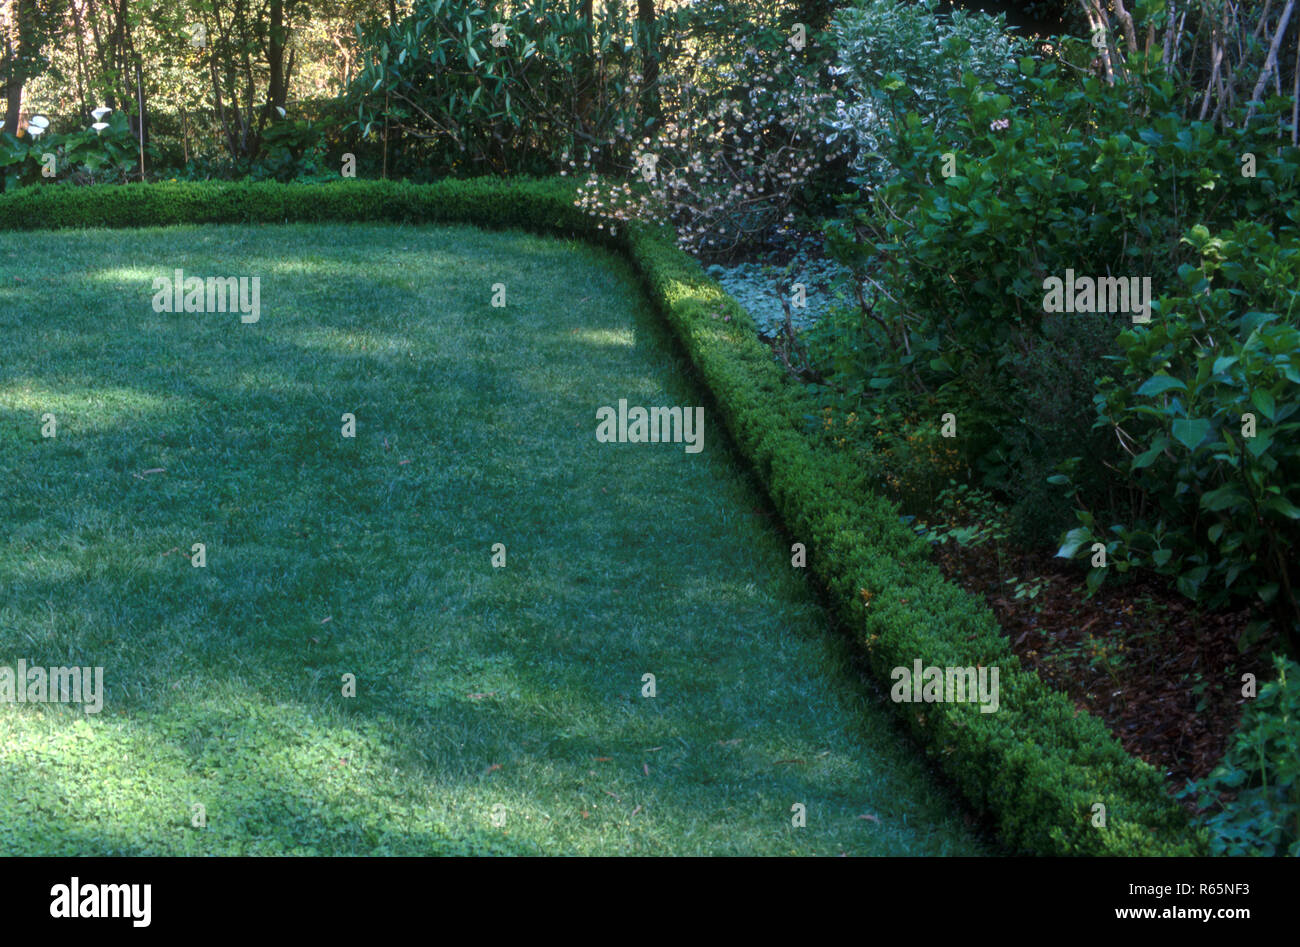 AUSTRALIAN GARDEN SCENE FEATURING A LUSH LAWN EDGED WITH LOW HEDGE Stock Photo